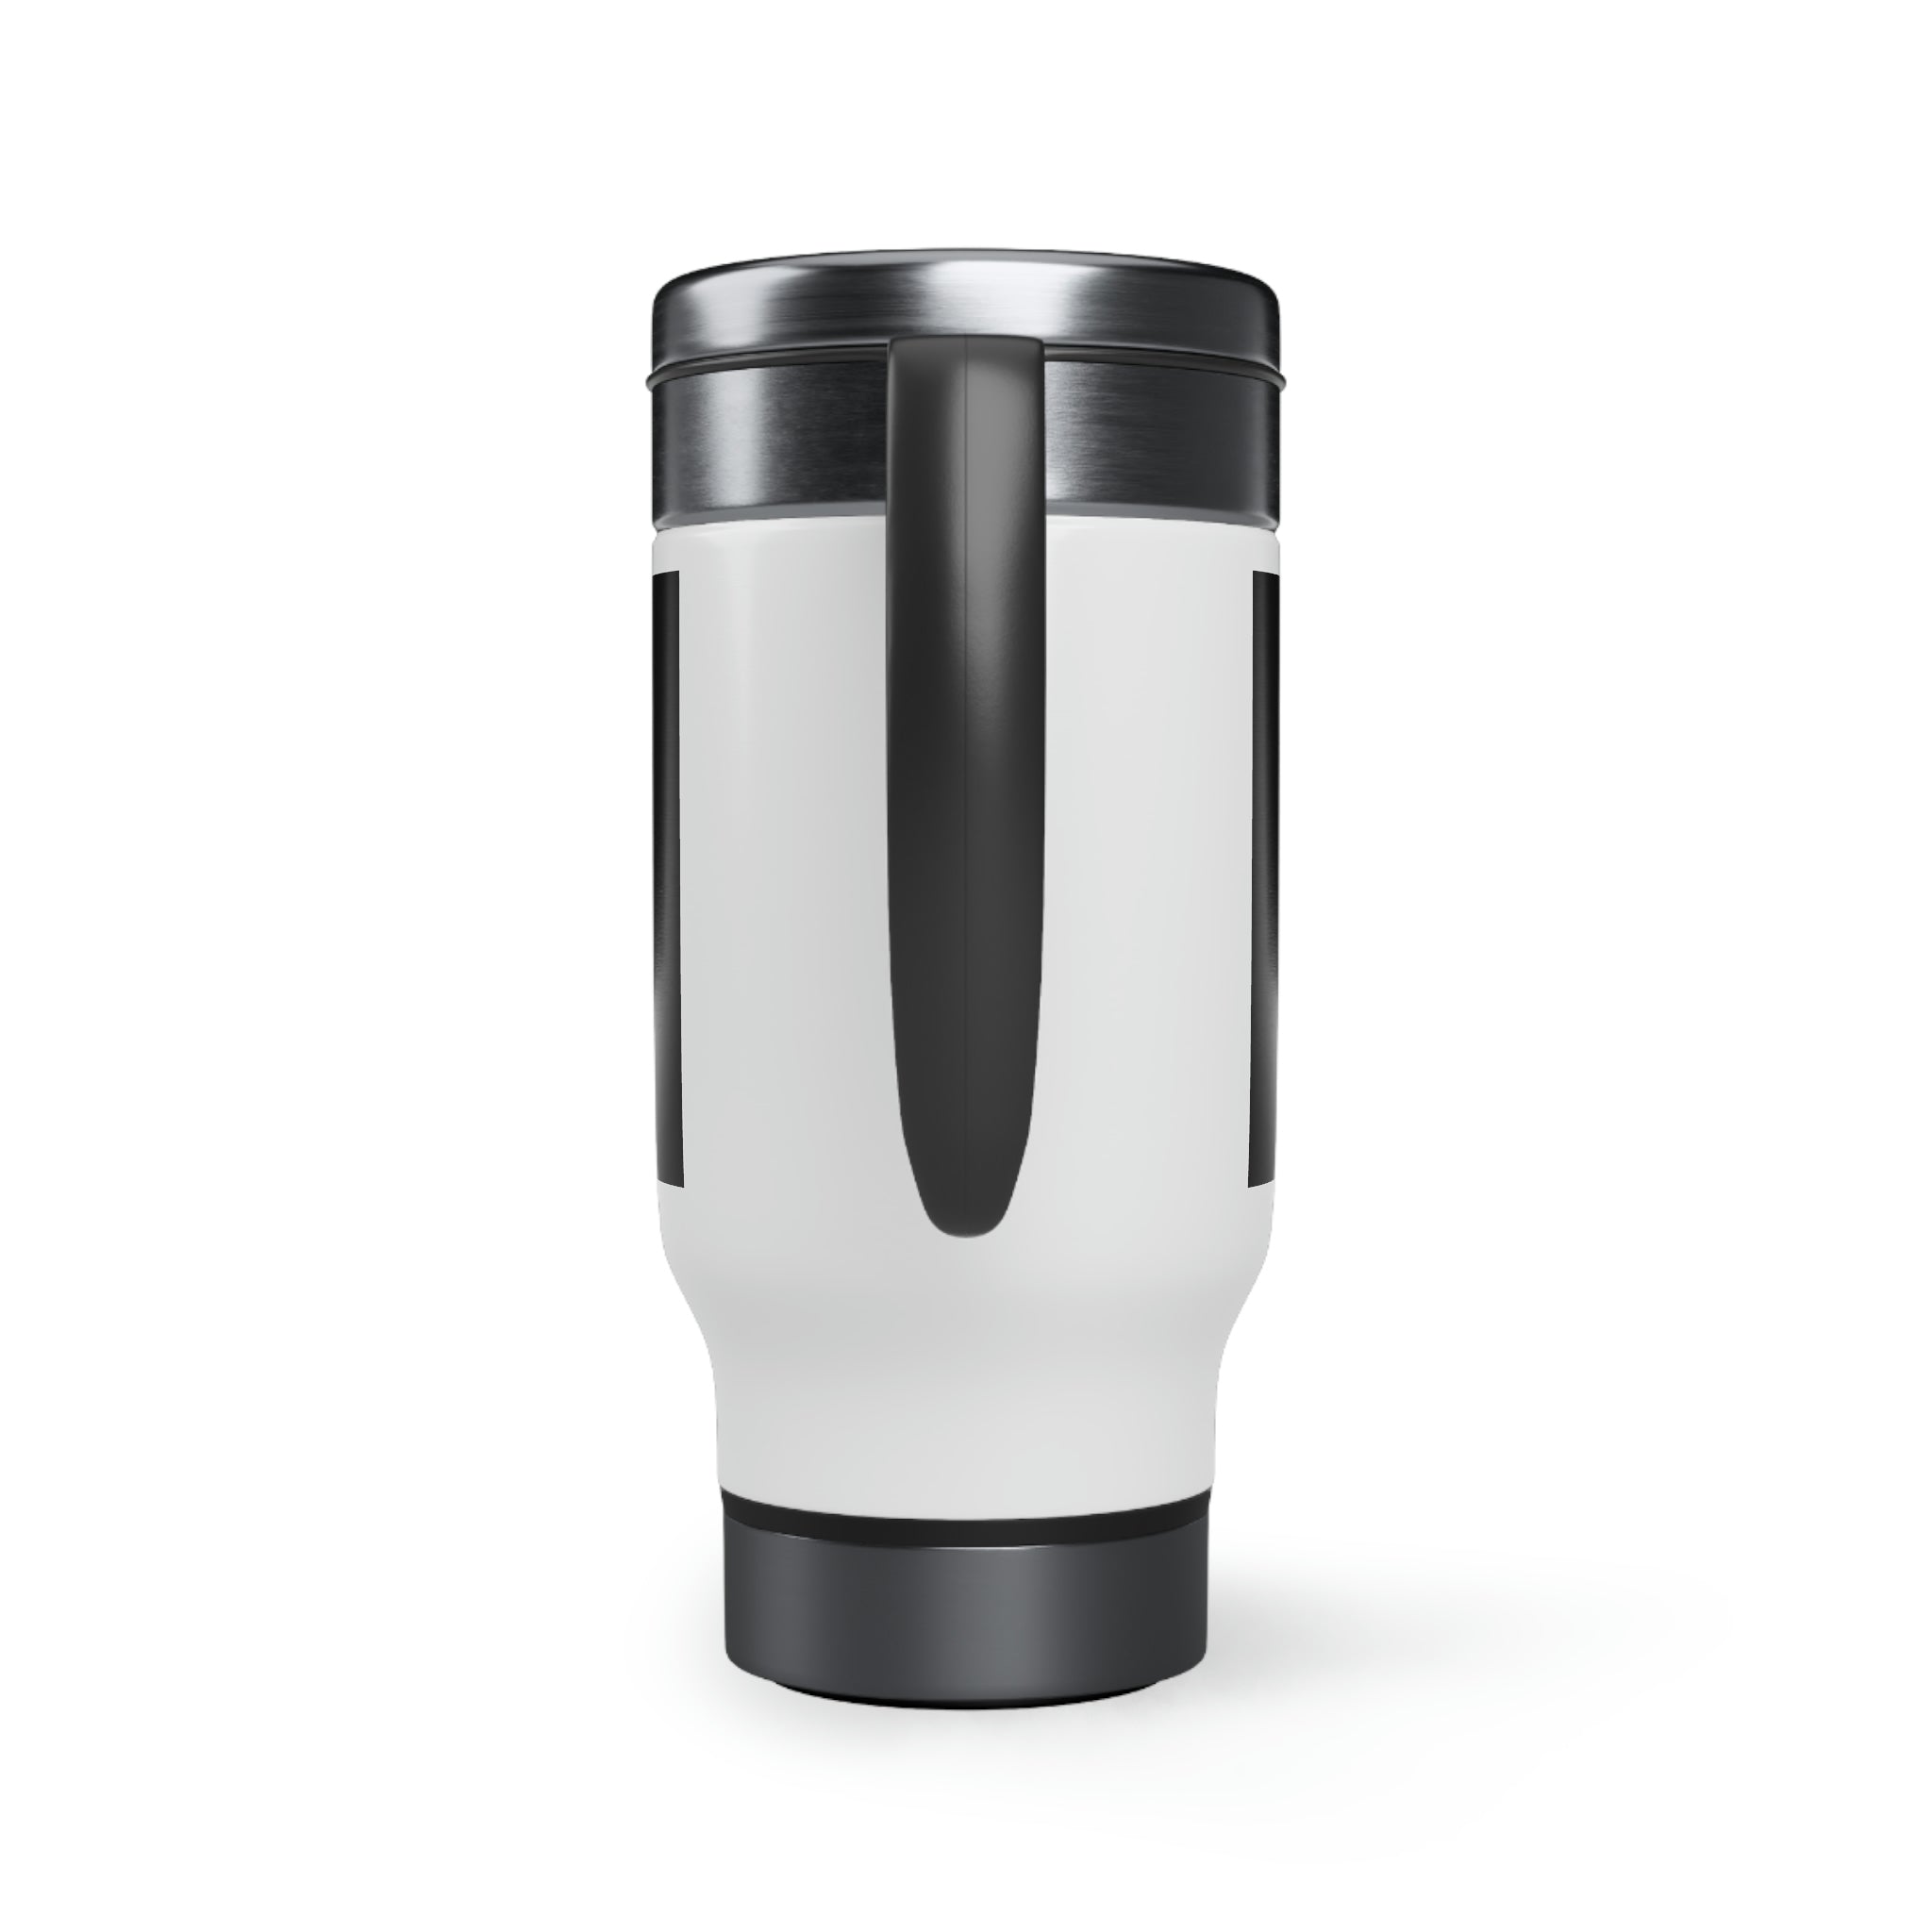 God, Family, Wrestling Stainless Steel Travel Mug with Handle, 14oz by XPA Gear